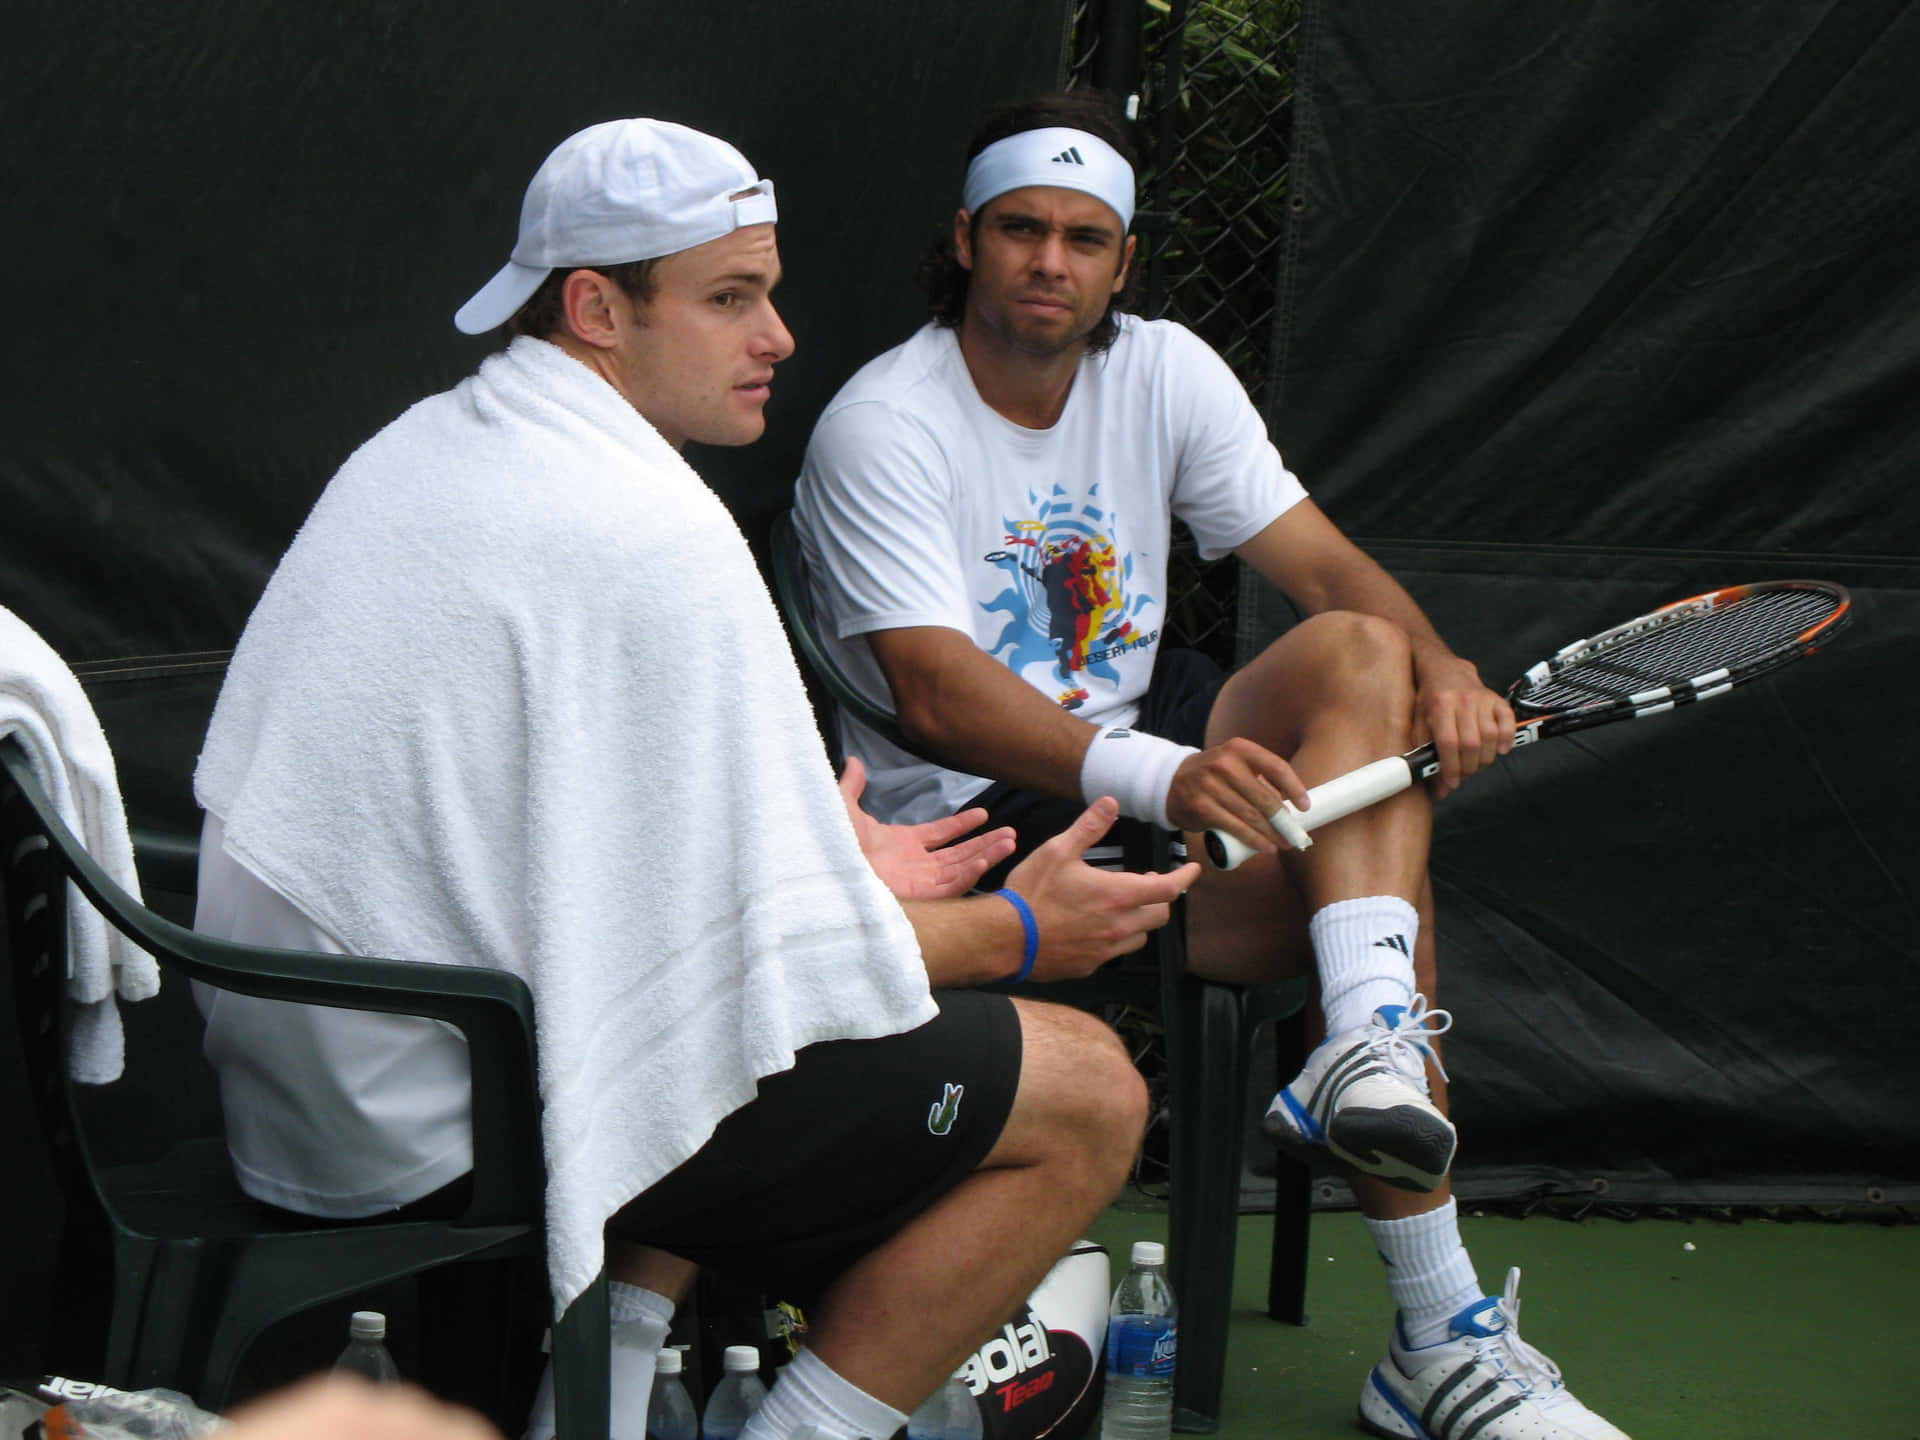 Andy Roddick With Towel On Him Wallpaper